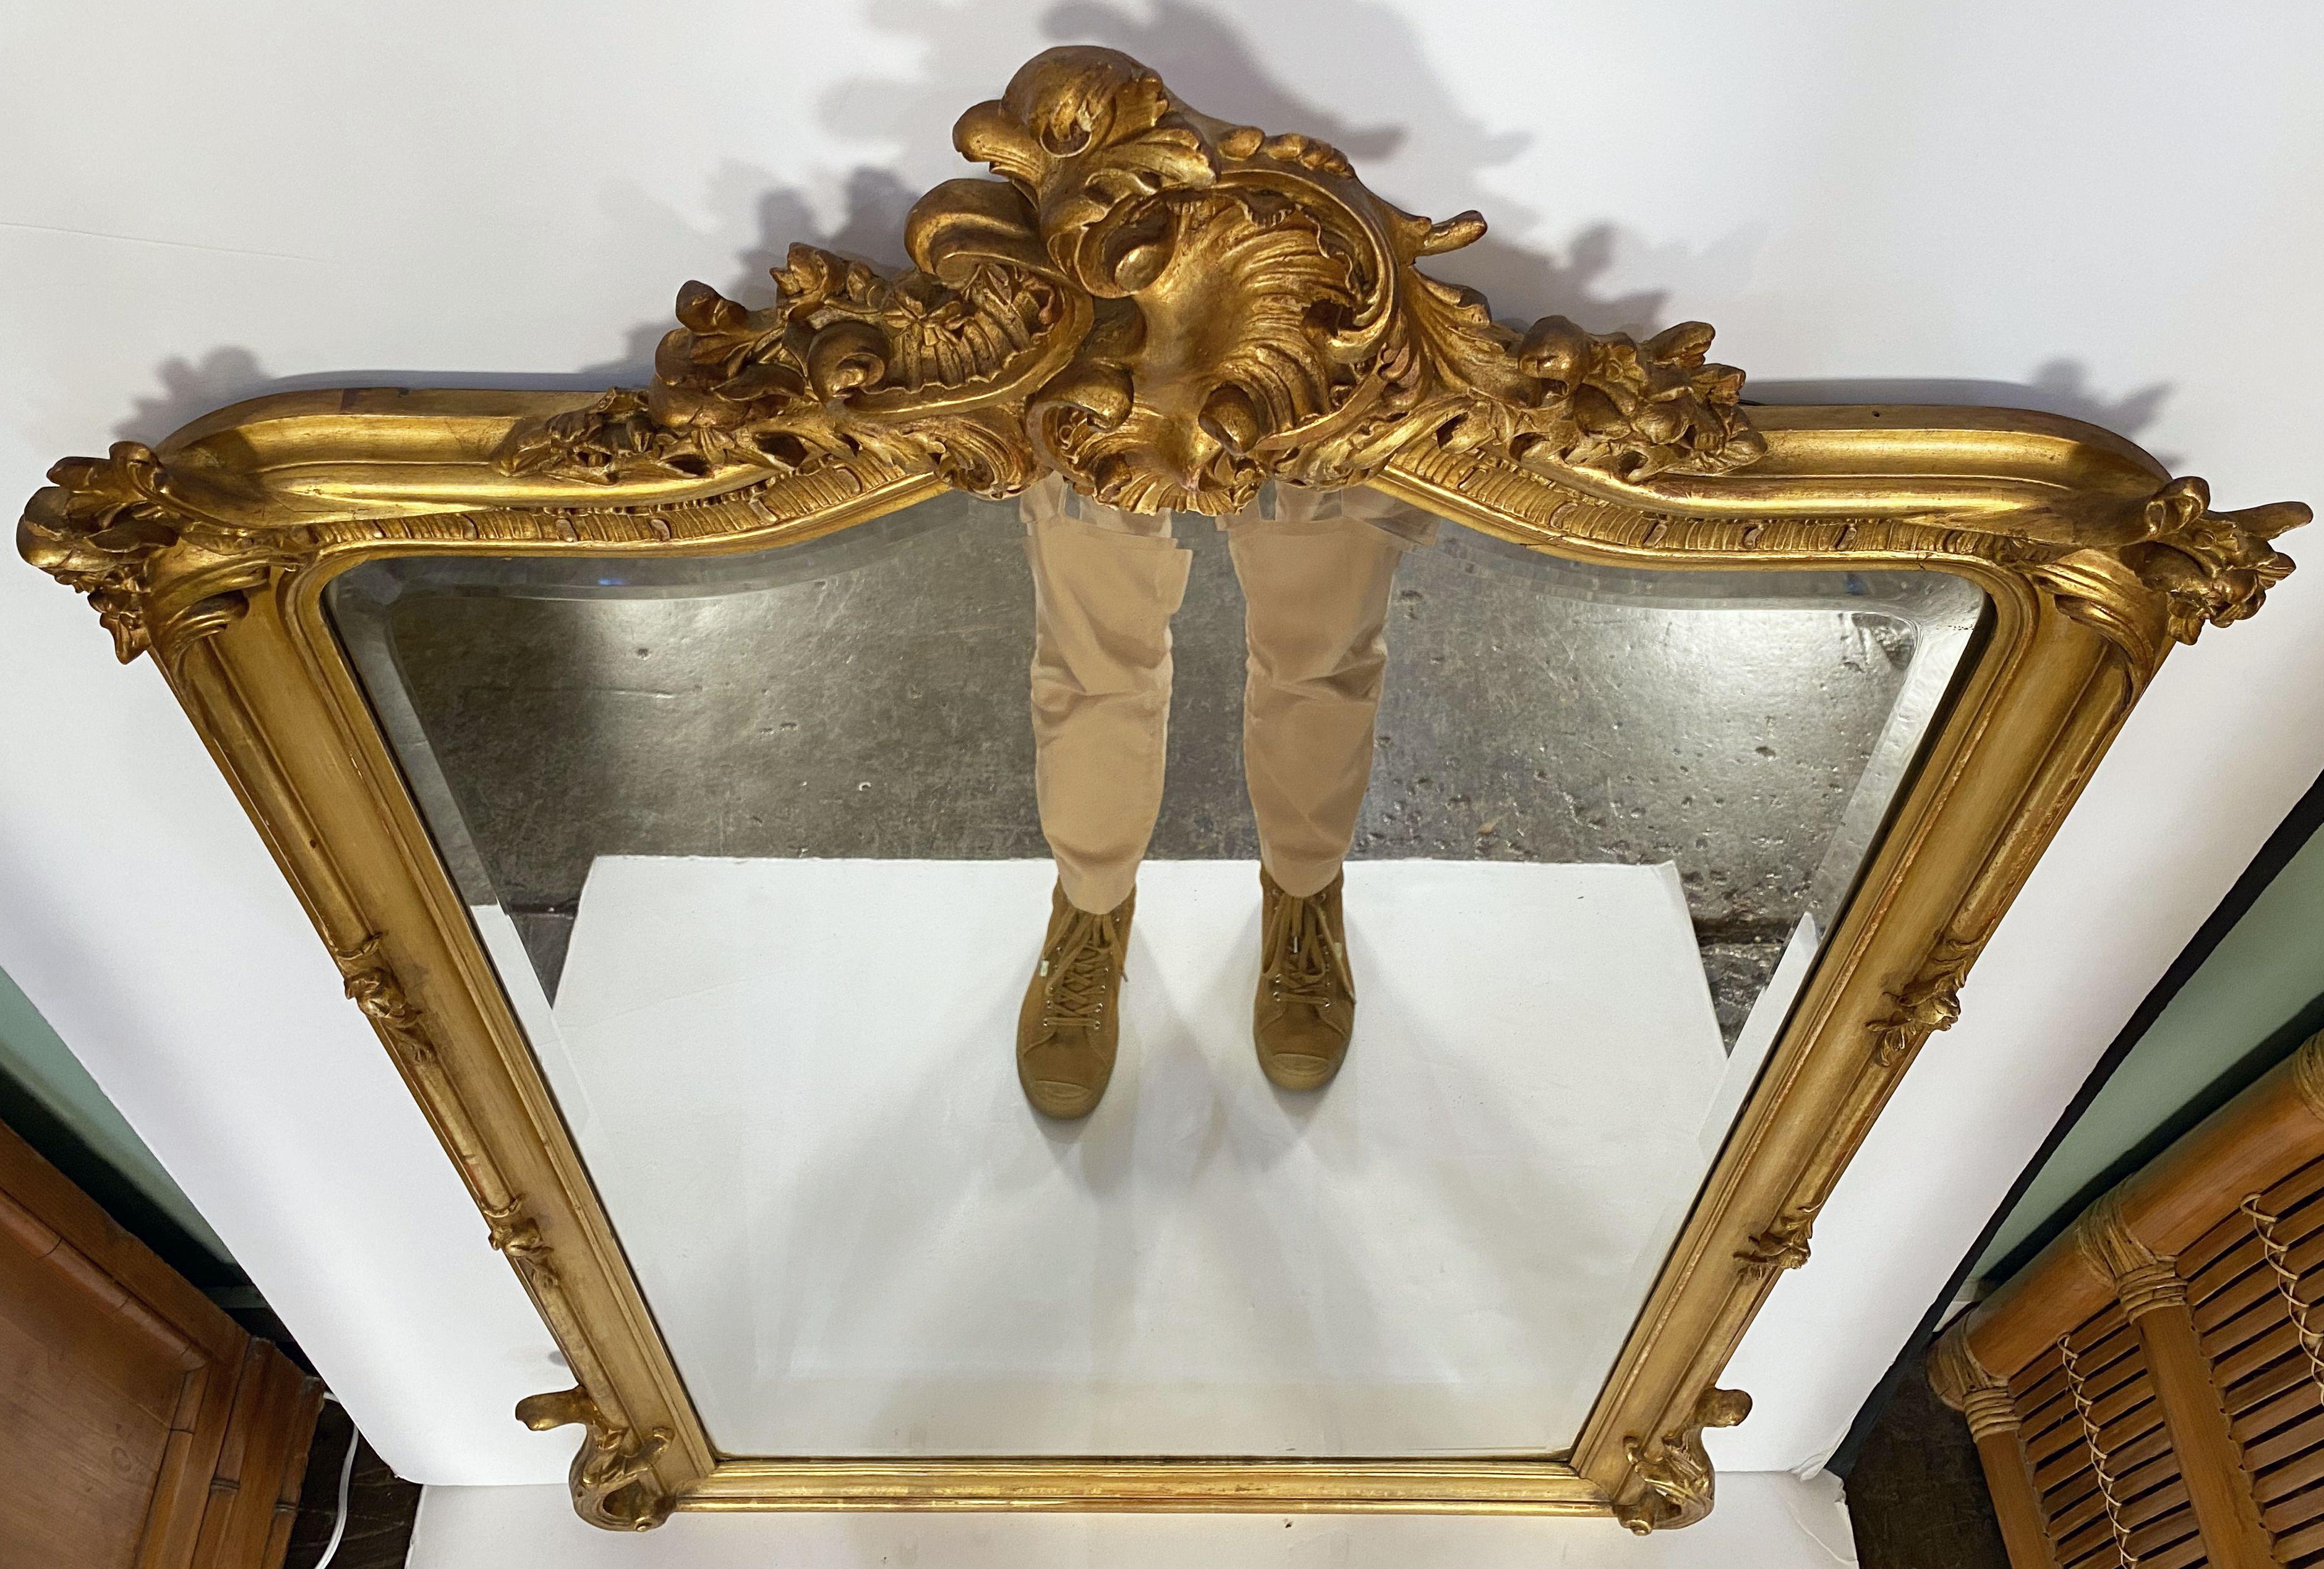 Large French Gilt Pier Mirror from the 19th Century (H 56 x W 37) For Sale 6